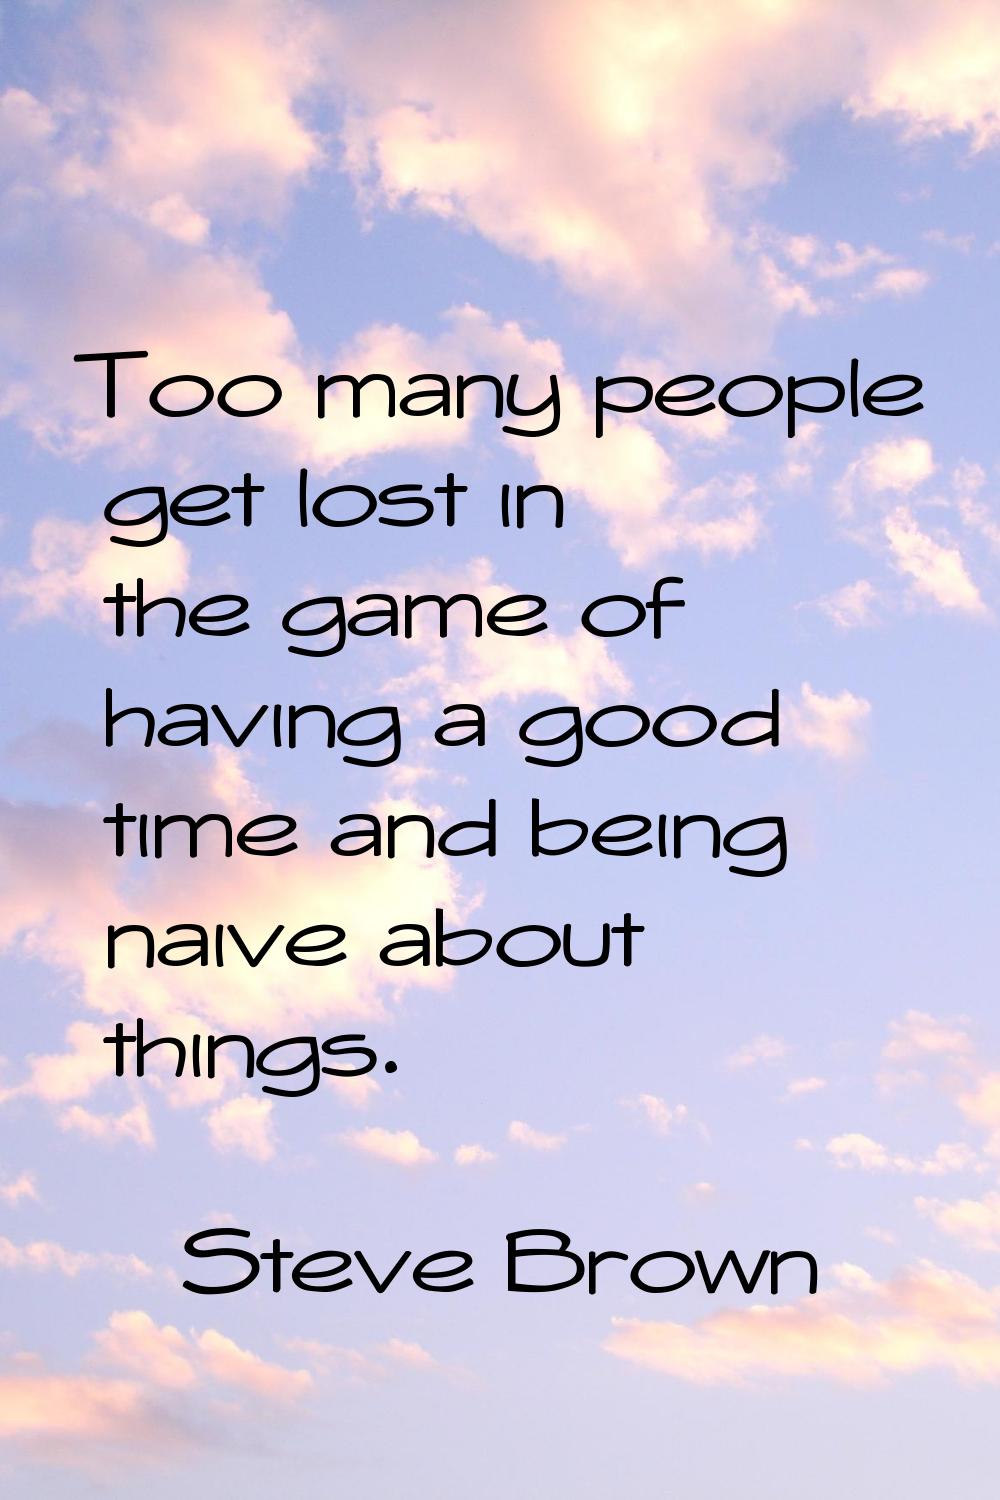 Too many people get lost in the game of having a good time and being naive about things.